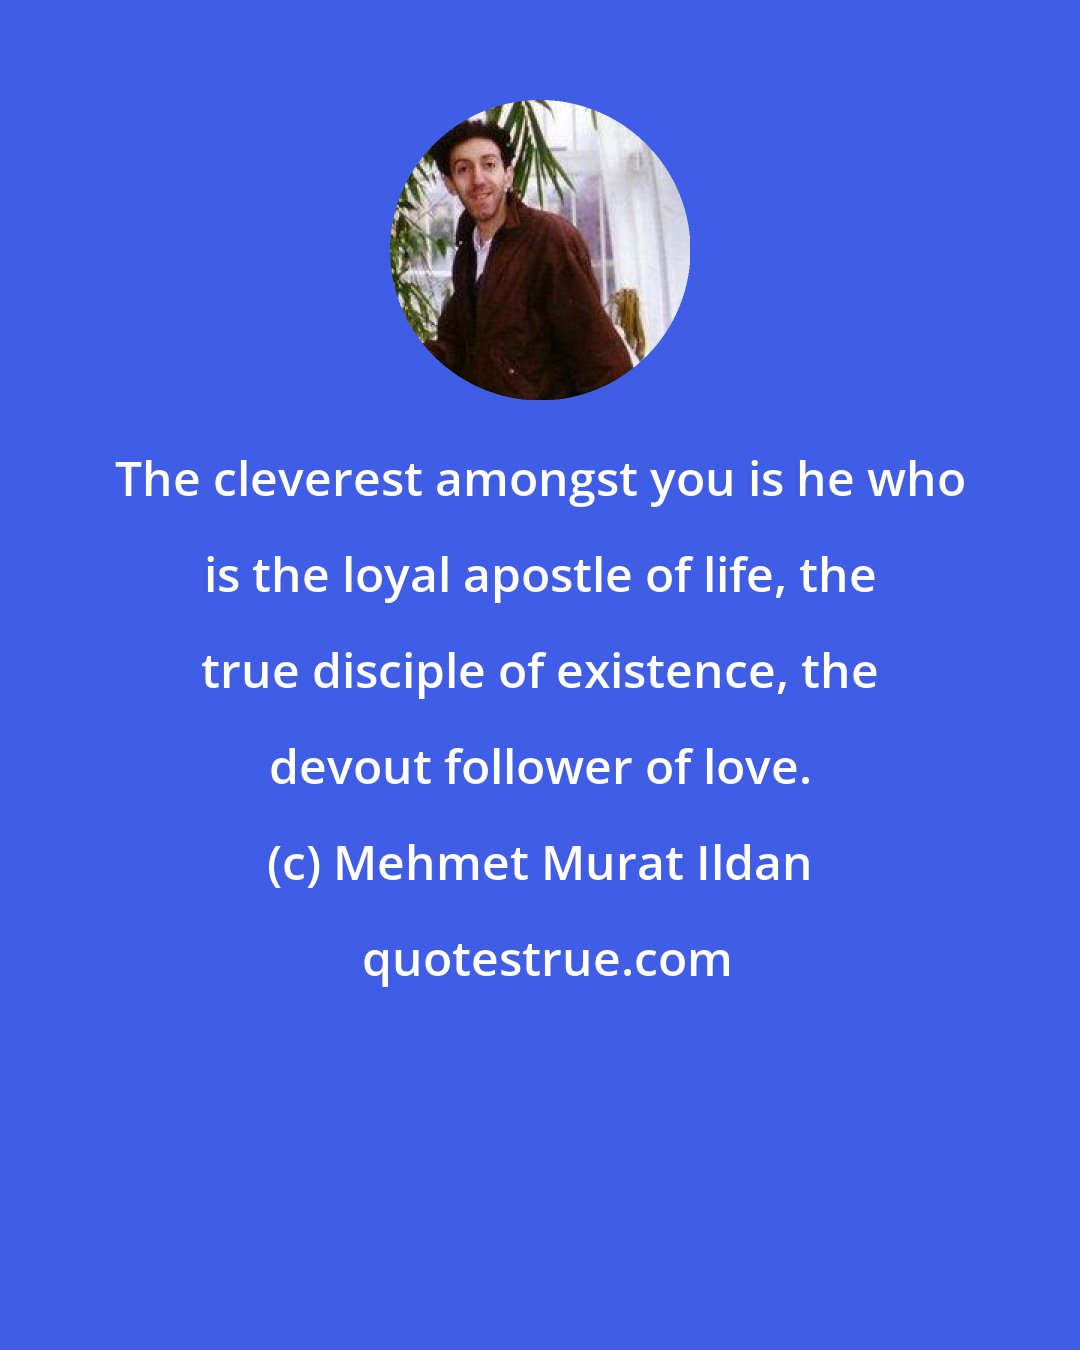 Mehmet Murat Ildan: The cleverest amongst you is he who is the loyal apostle of life, the true disciple of existence, the devout follower of love.